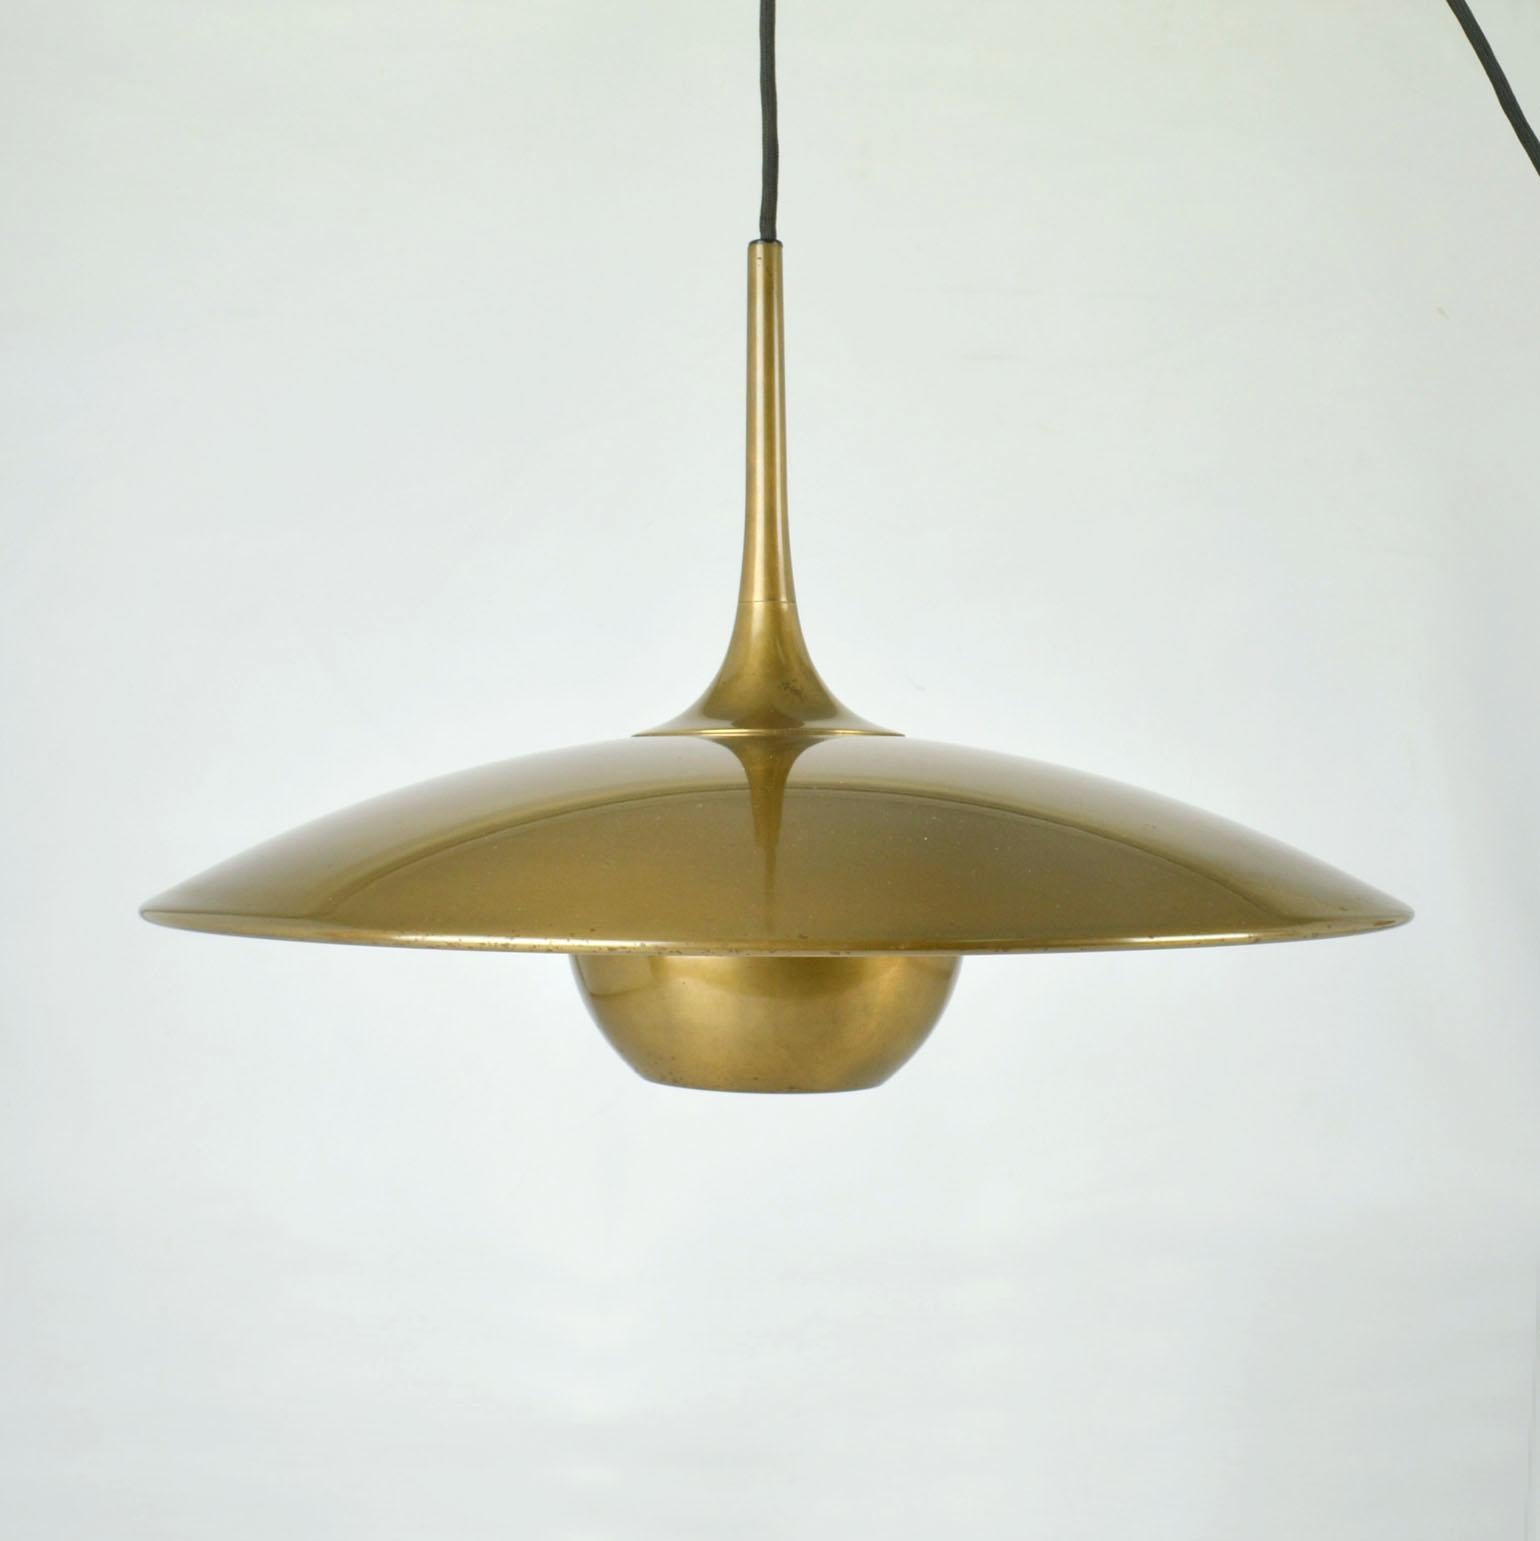 Pendant Lamp Onos 40 in Brass by Florian Schulz 1960's, Counterbalance 1